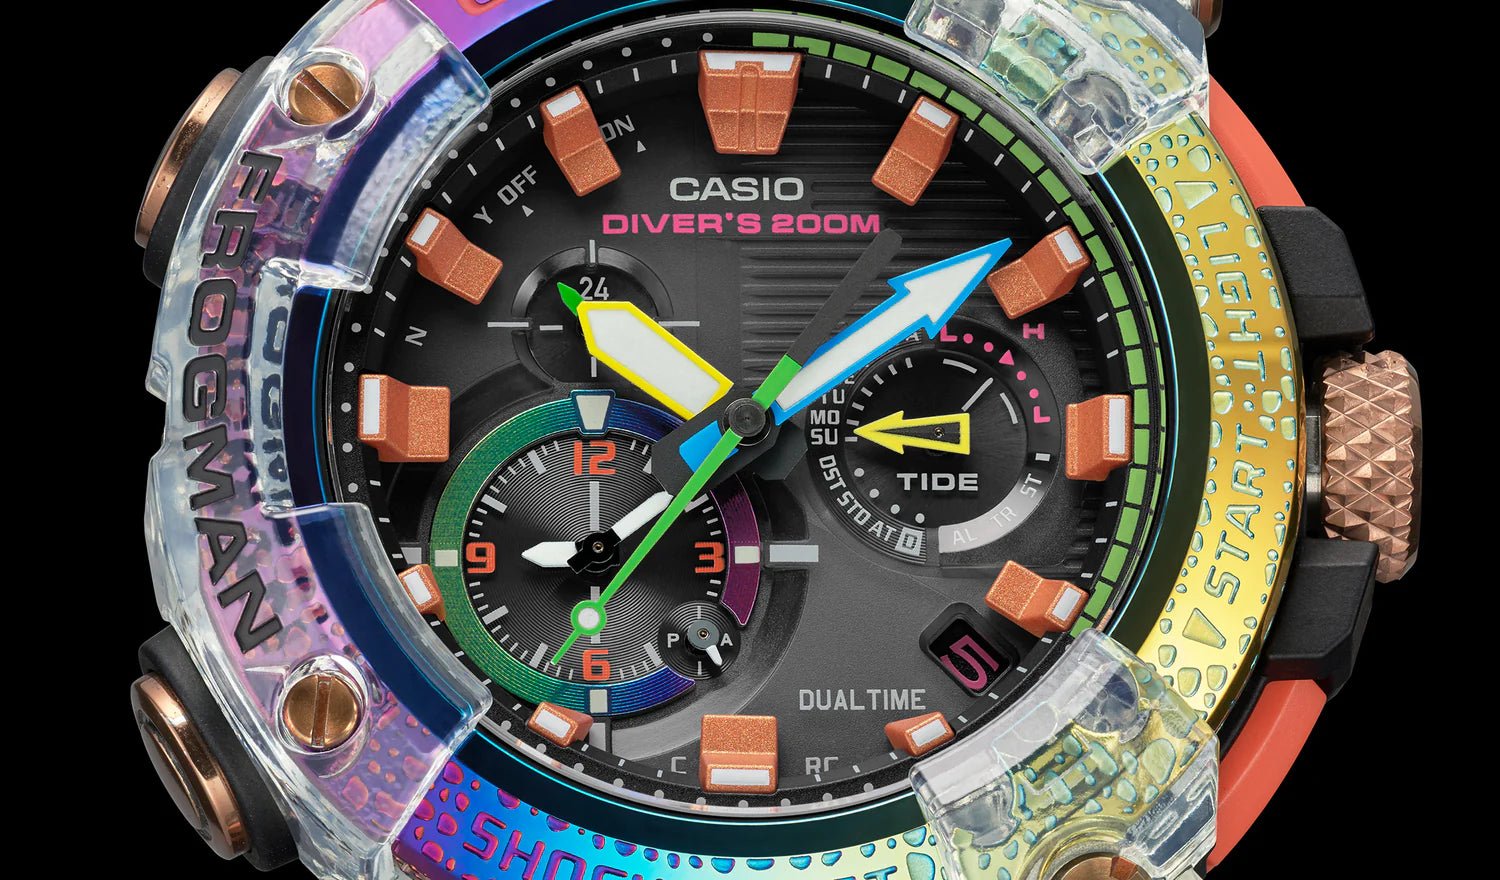 The First Limited Edition G-Shock Borneo Rainbow Frogman - the  GWFA1000BRT-1A